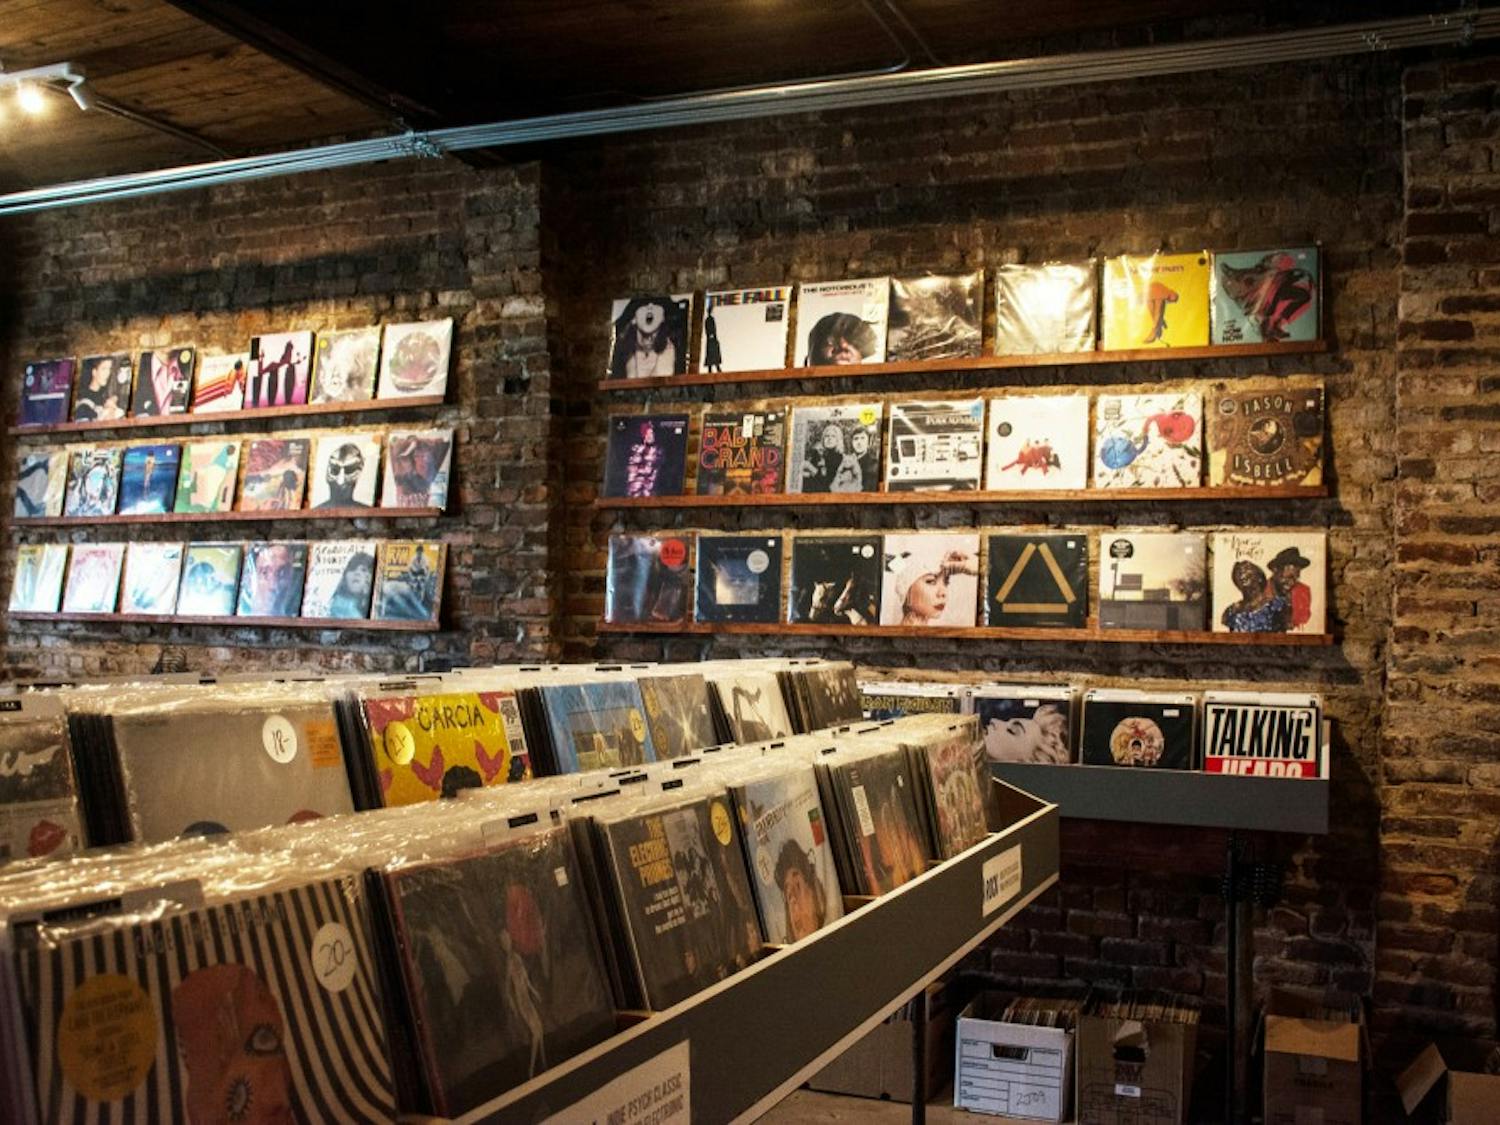 Records line the walls at 10,000 Hz Record store in Opelika, Ala. on Tuesday, Aug. 21.